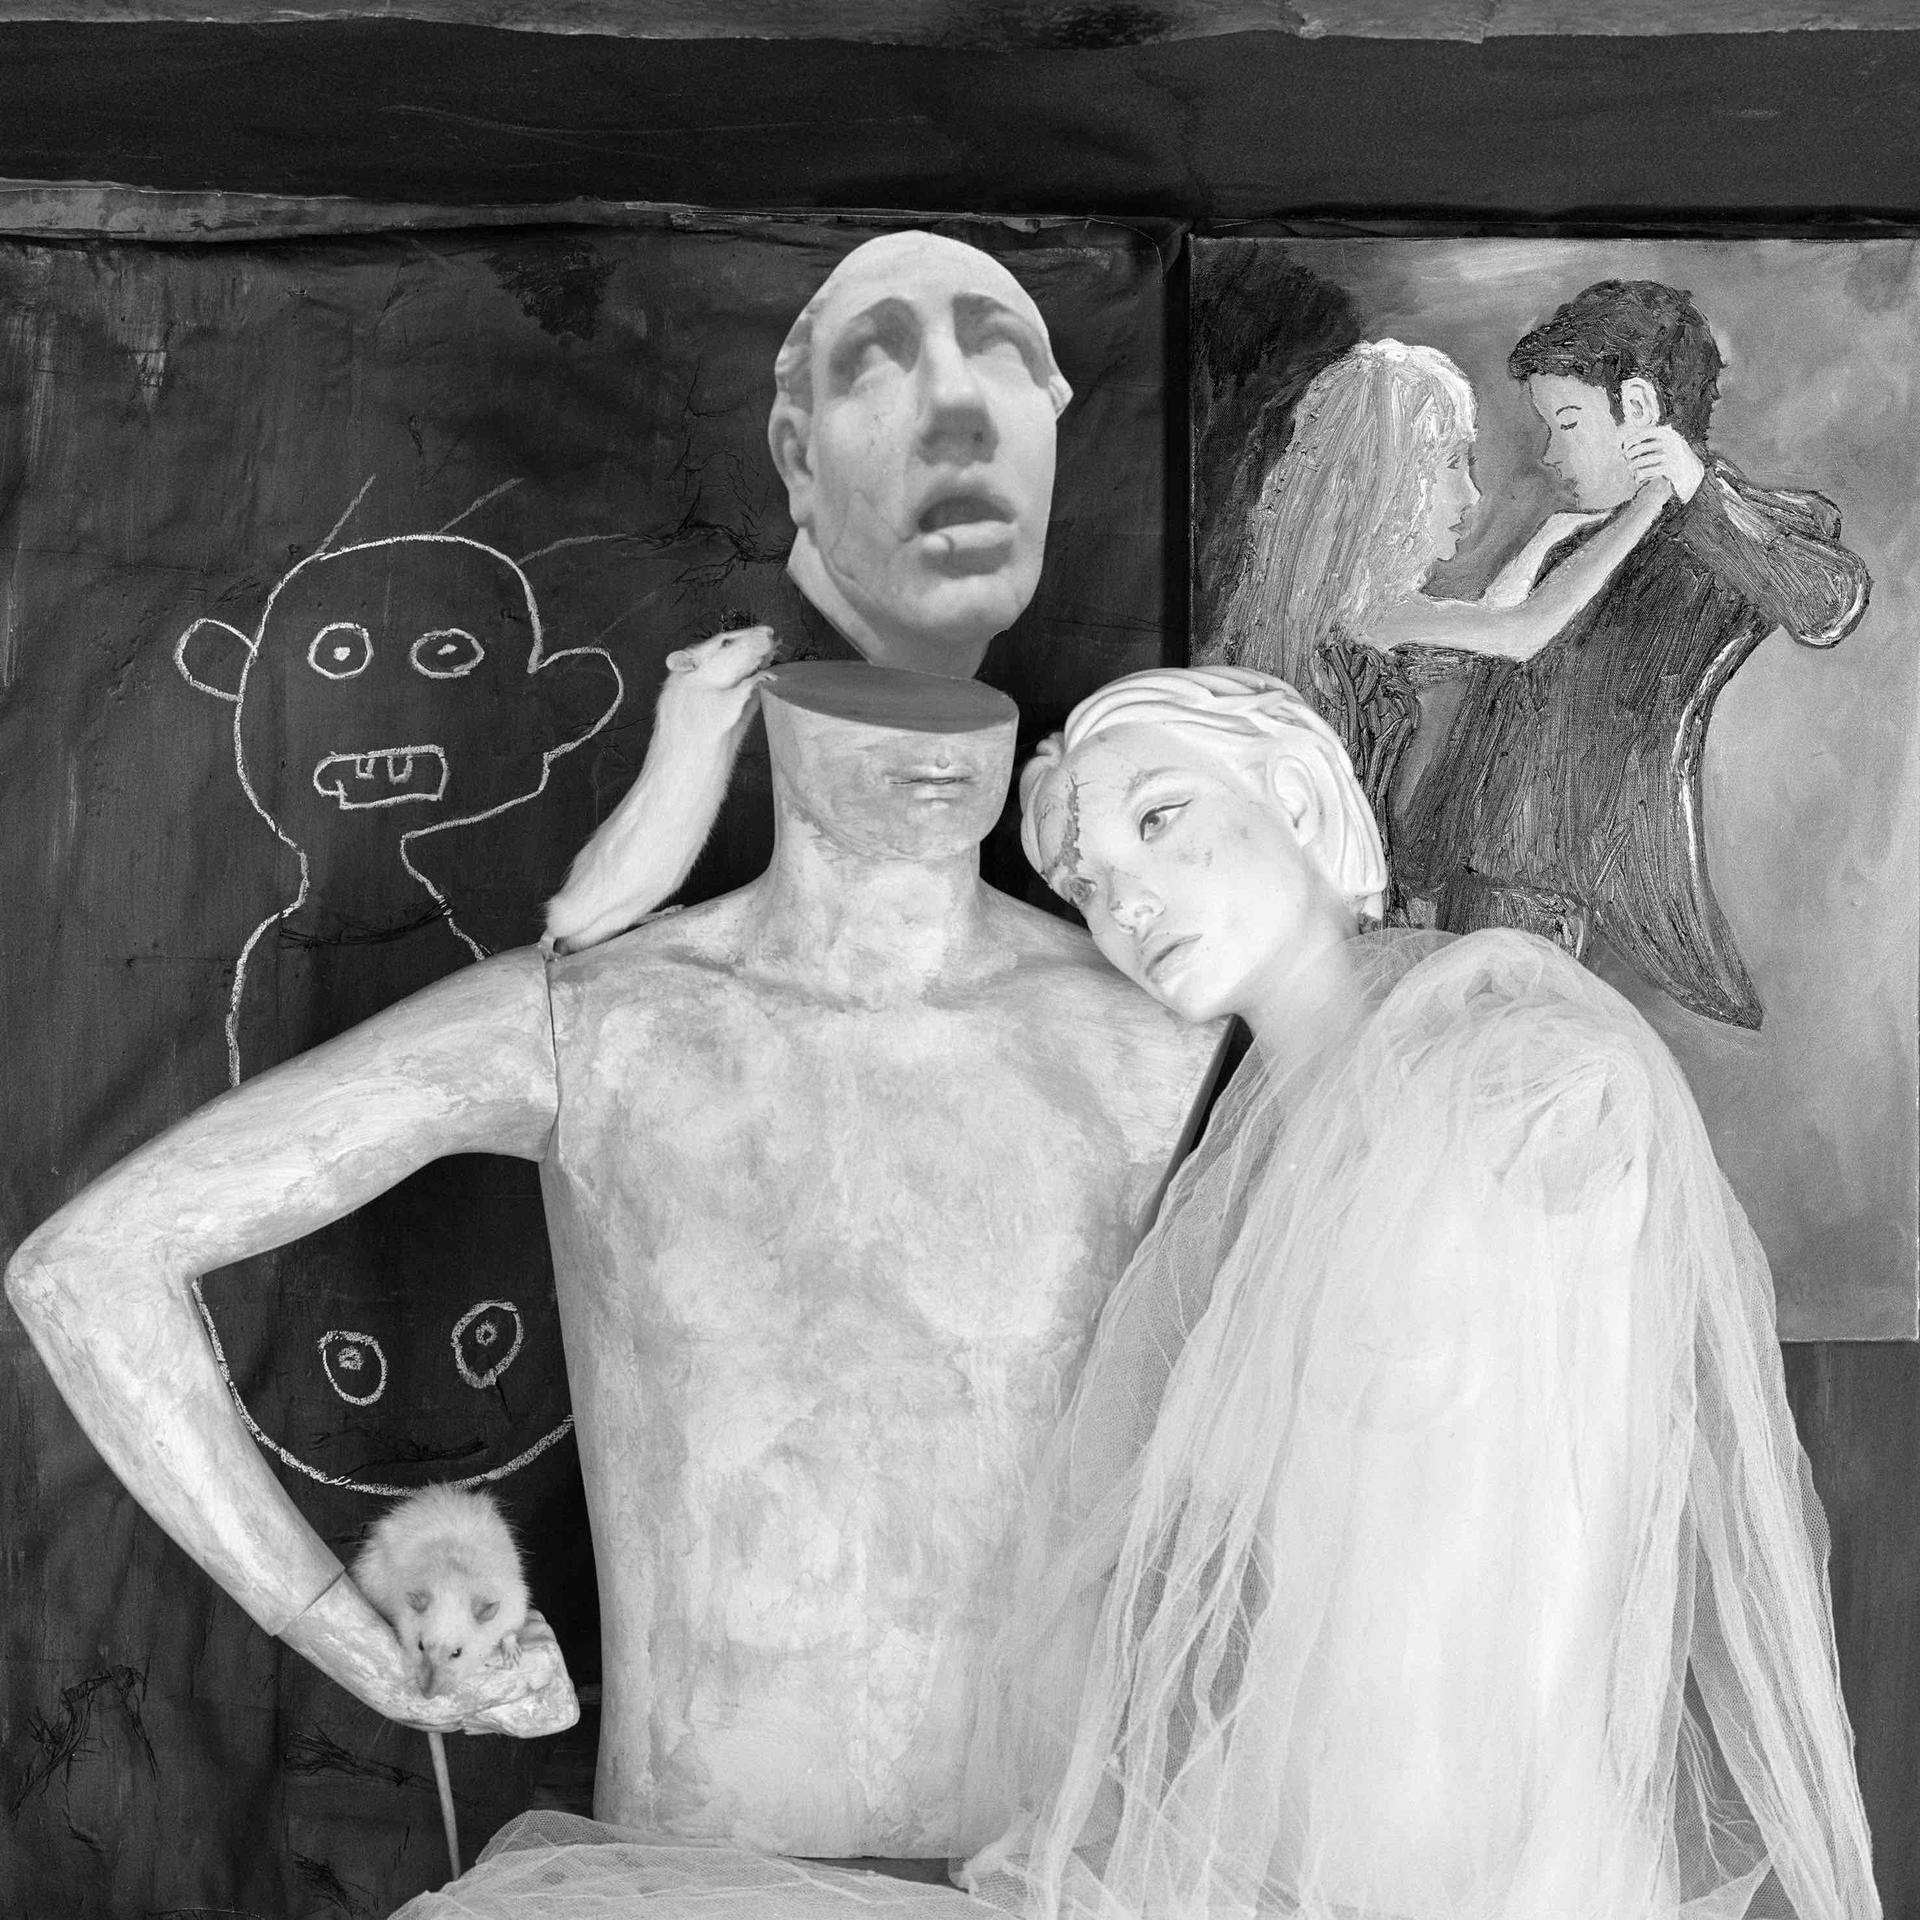 Roger Ballen – The Place of the Upside Down